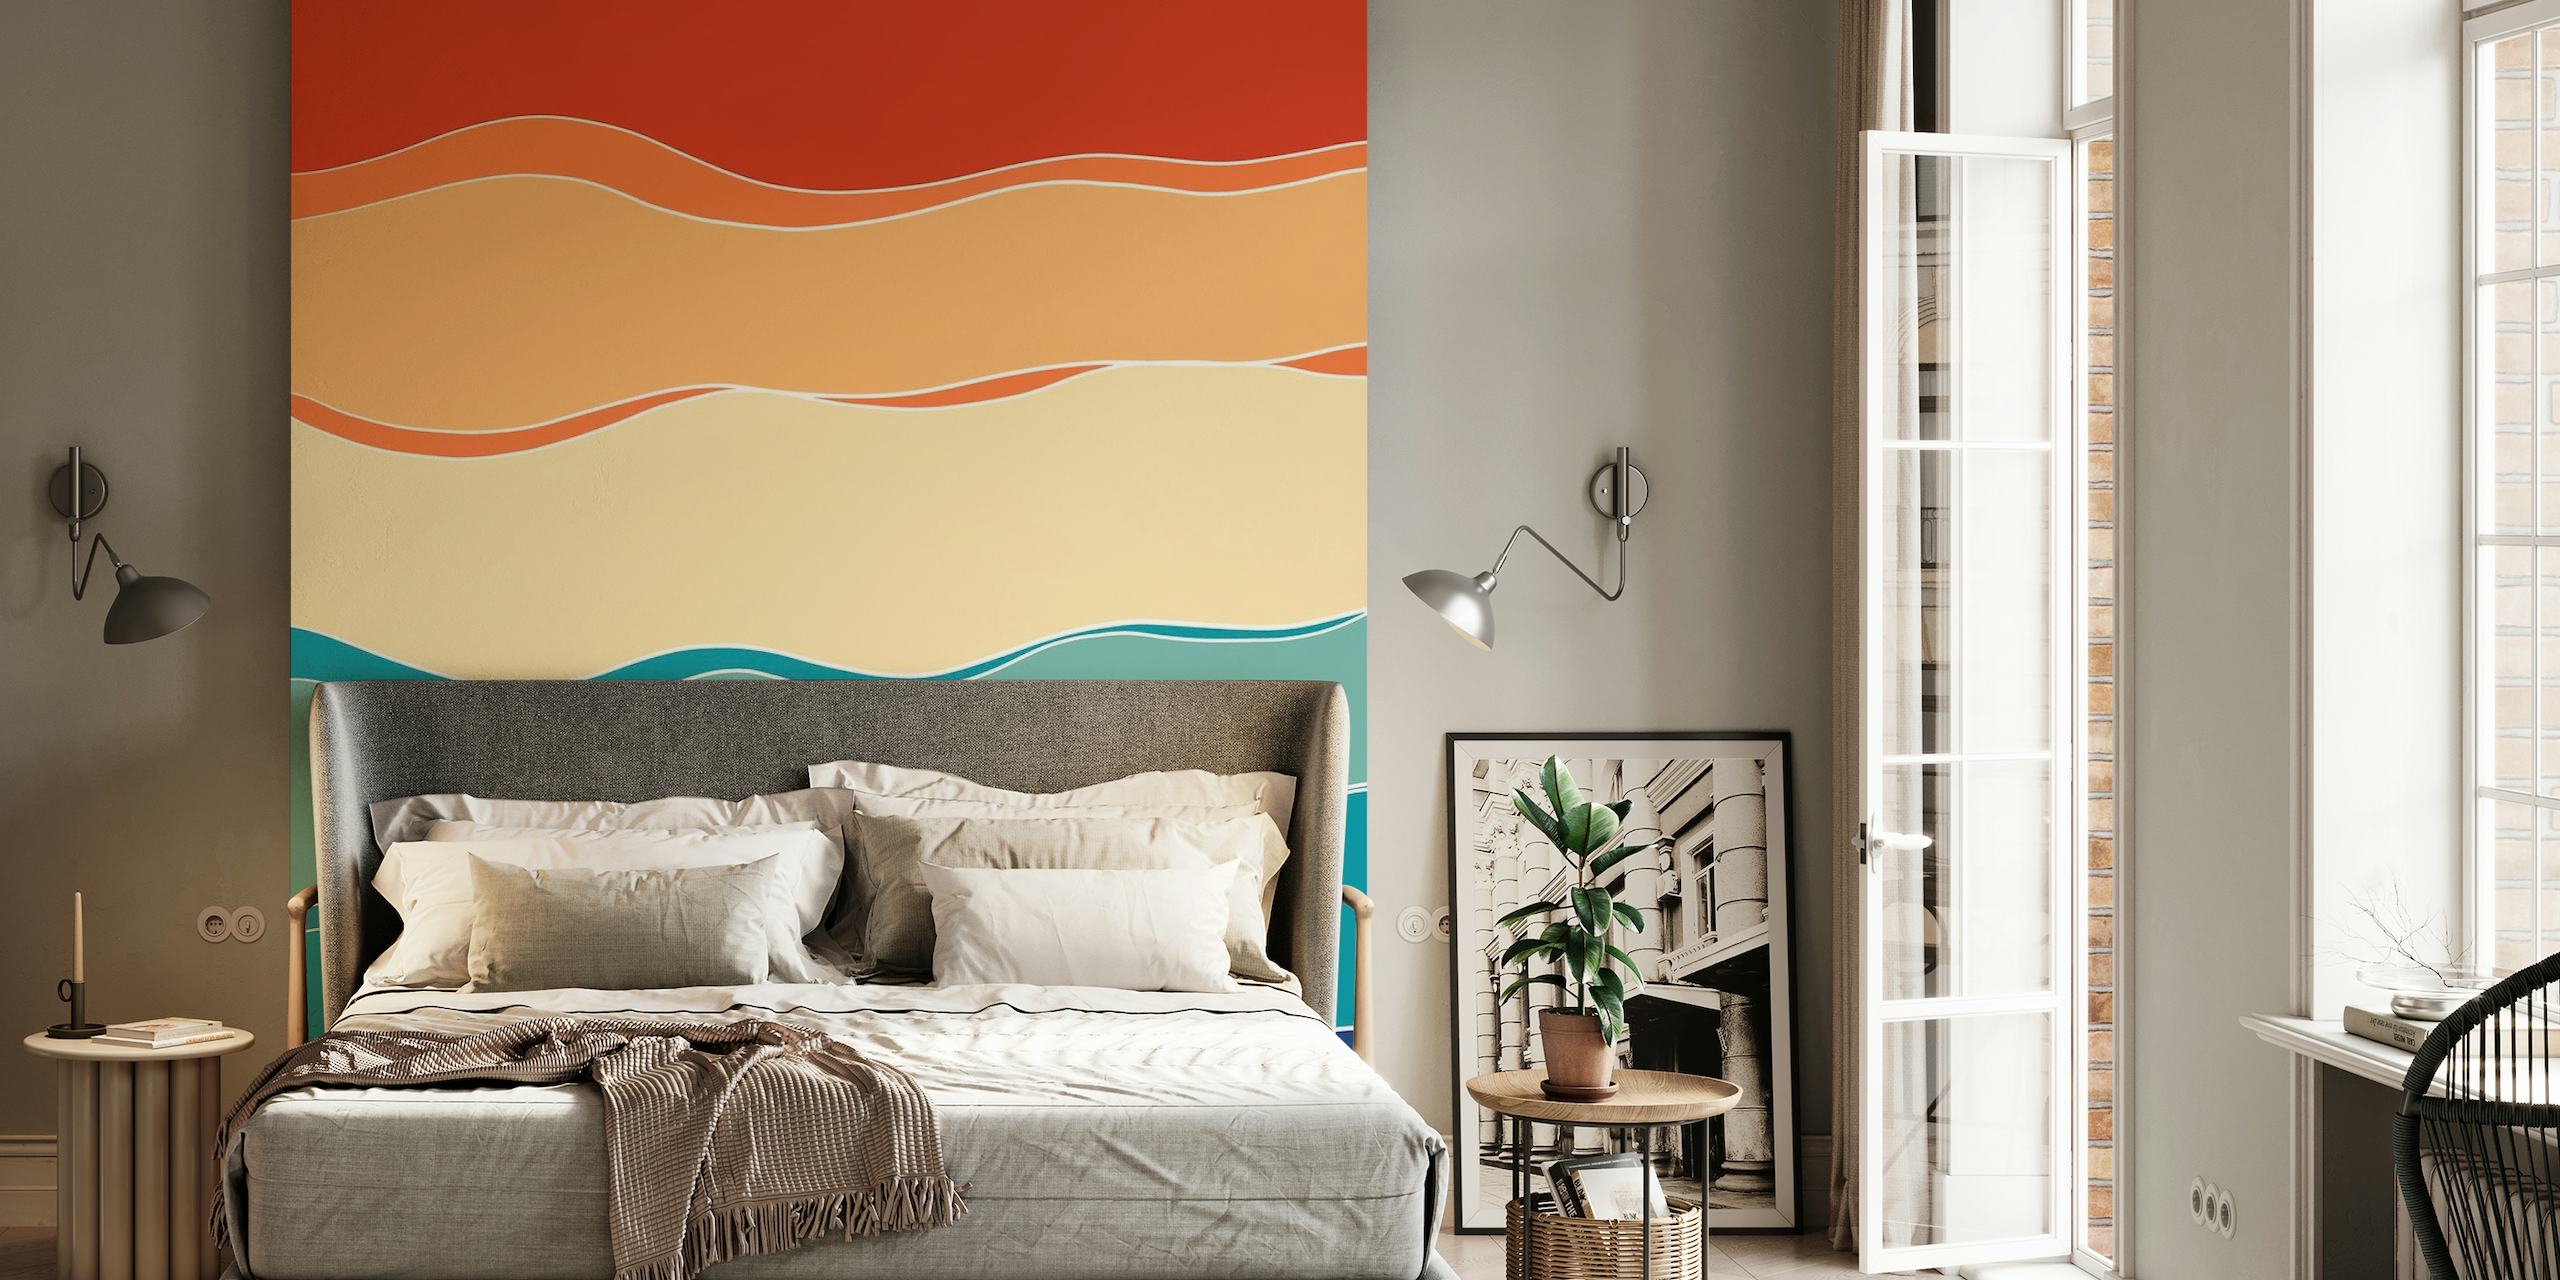 Abstract Retro Summer Ocean Wave wall mural with gradient stripes in warm and cool colors